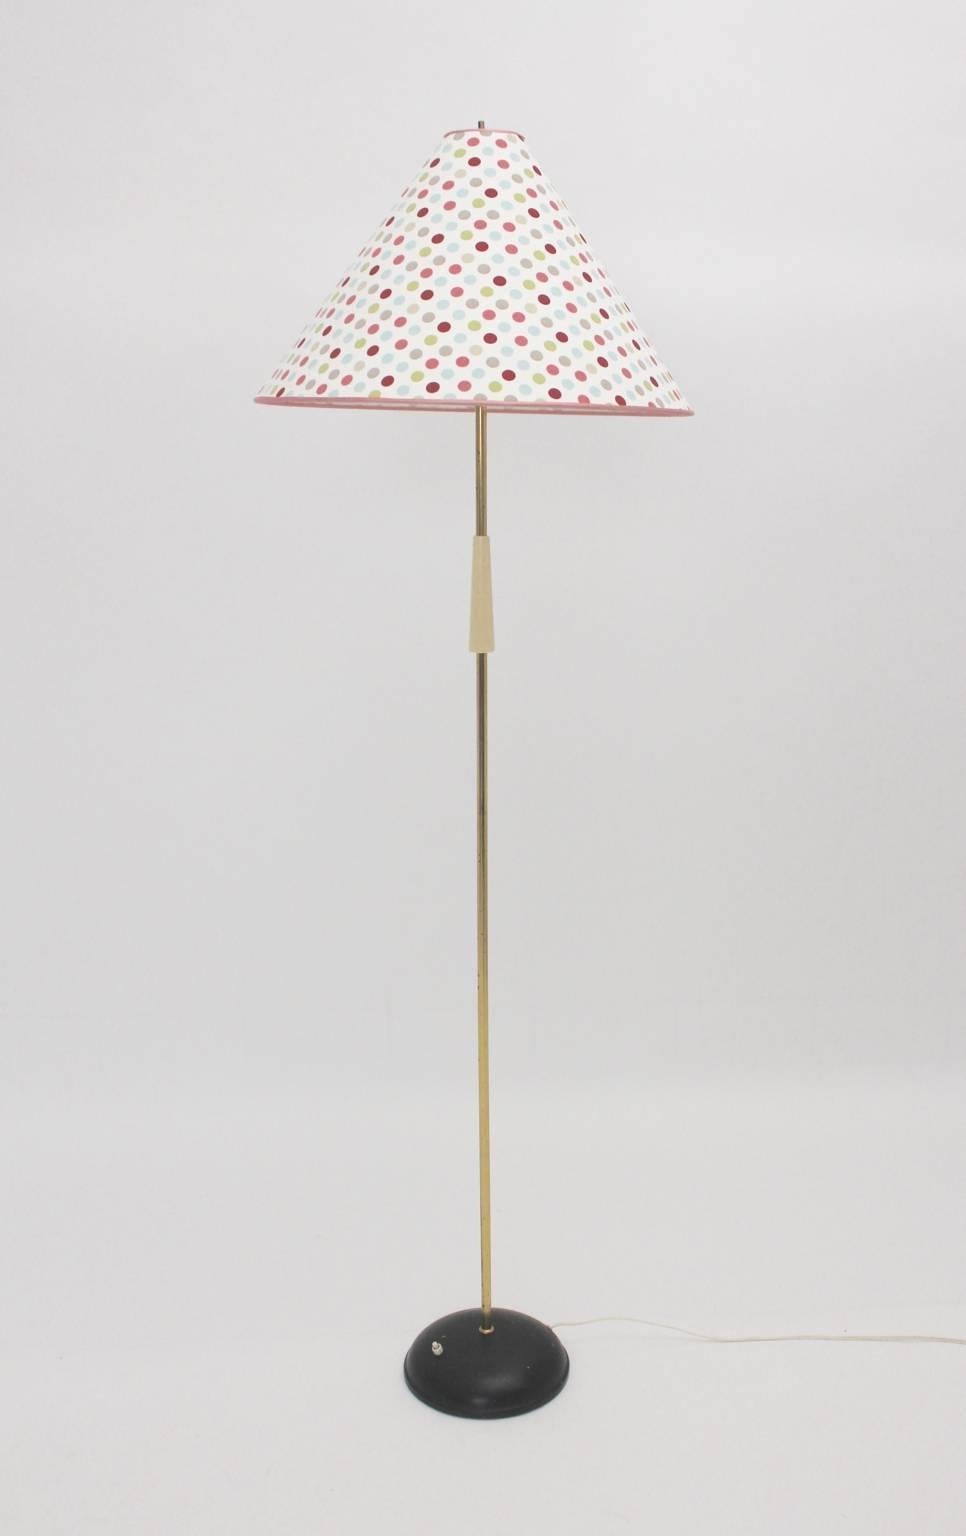 Mid century modern vintage floor lamp with a round black lacquered metal foot and a brass stem partly with an ivory plastic handle.
The recovered textile fabric lamp shade has a very nice pattern with dots.
The on/off switch is integrated in the